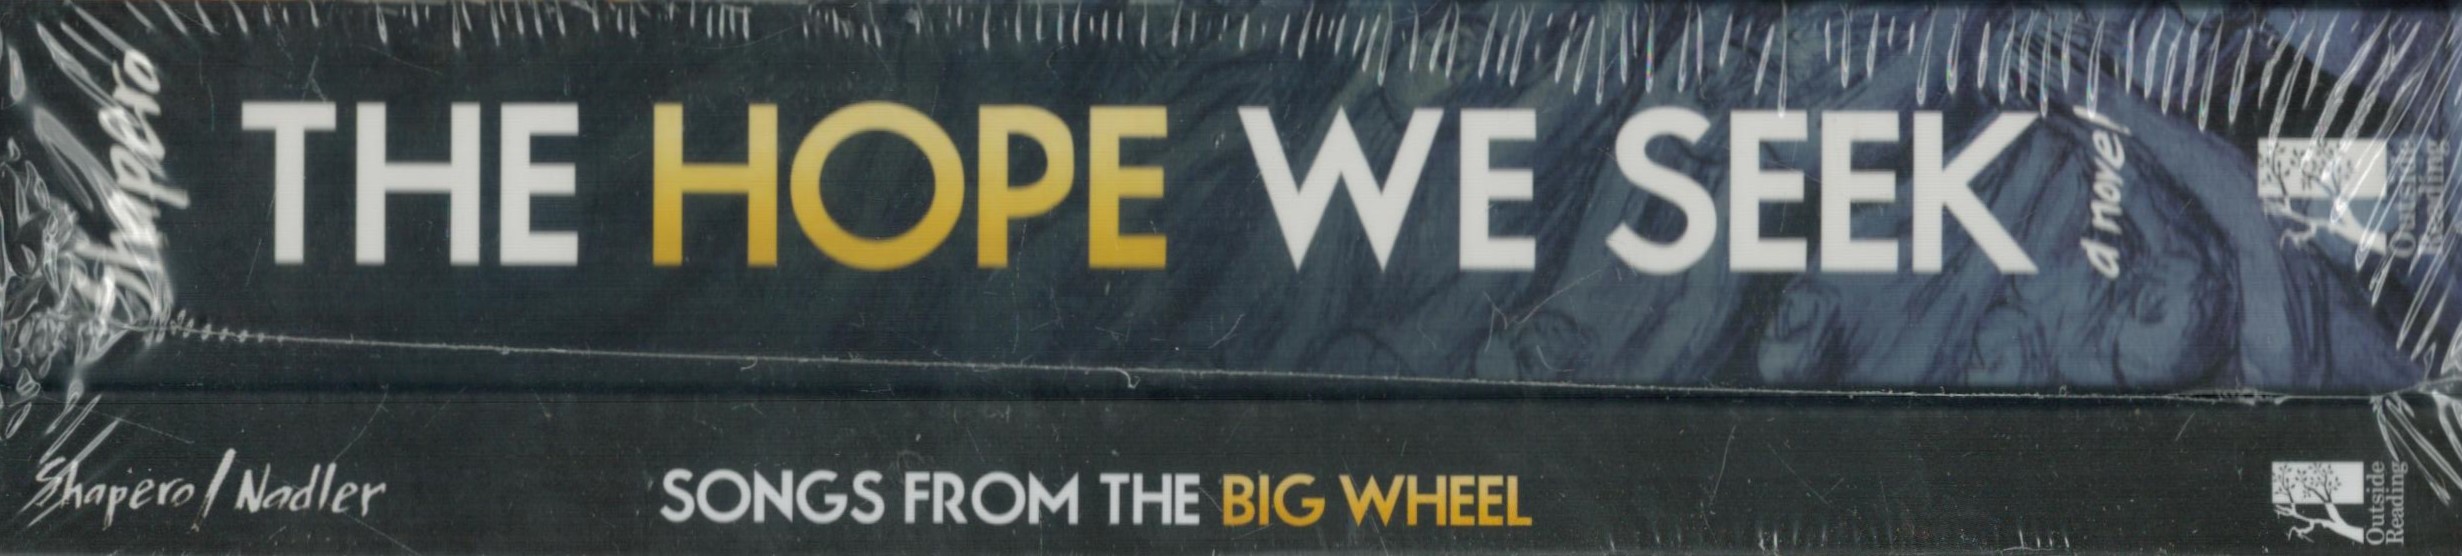 The Hope we Seek - a novel by Rich Shapero 2014 Book & CD unopened and still in cellophane - Image 3 of 3